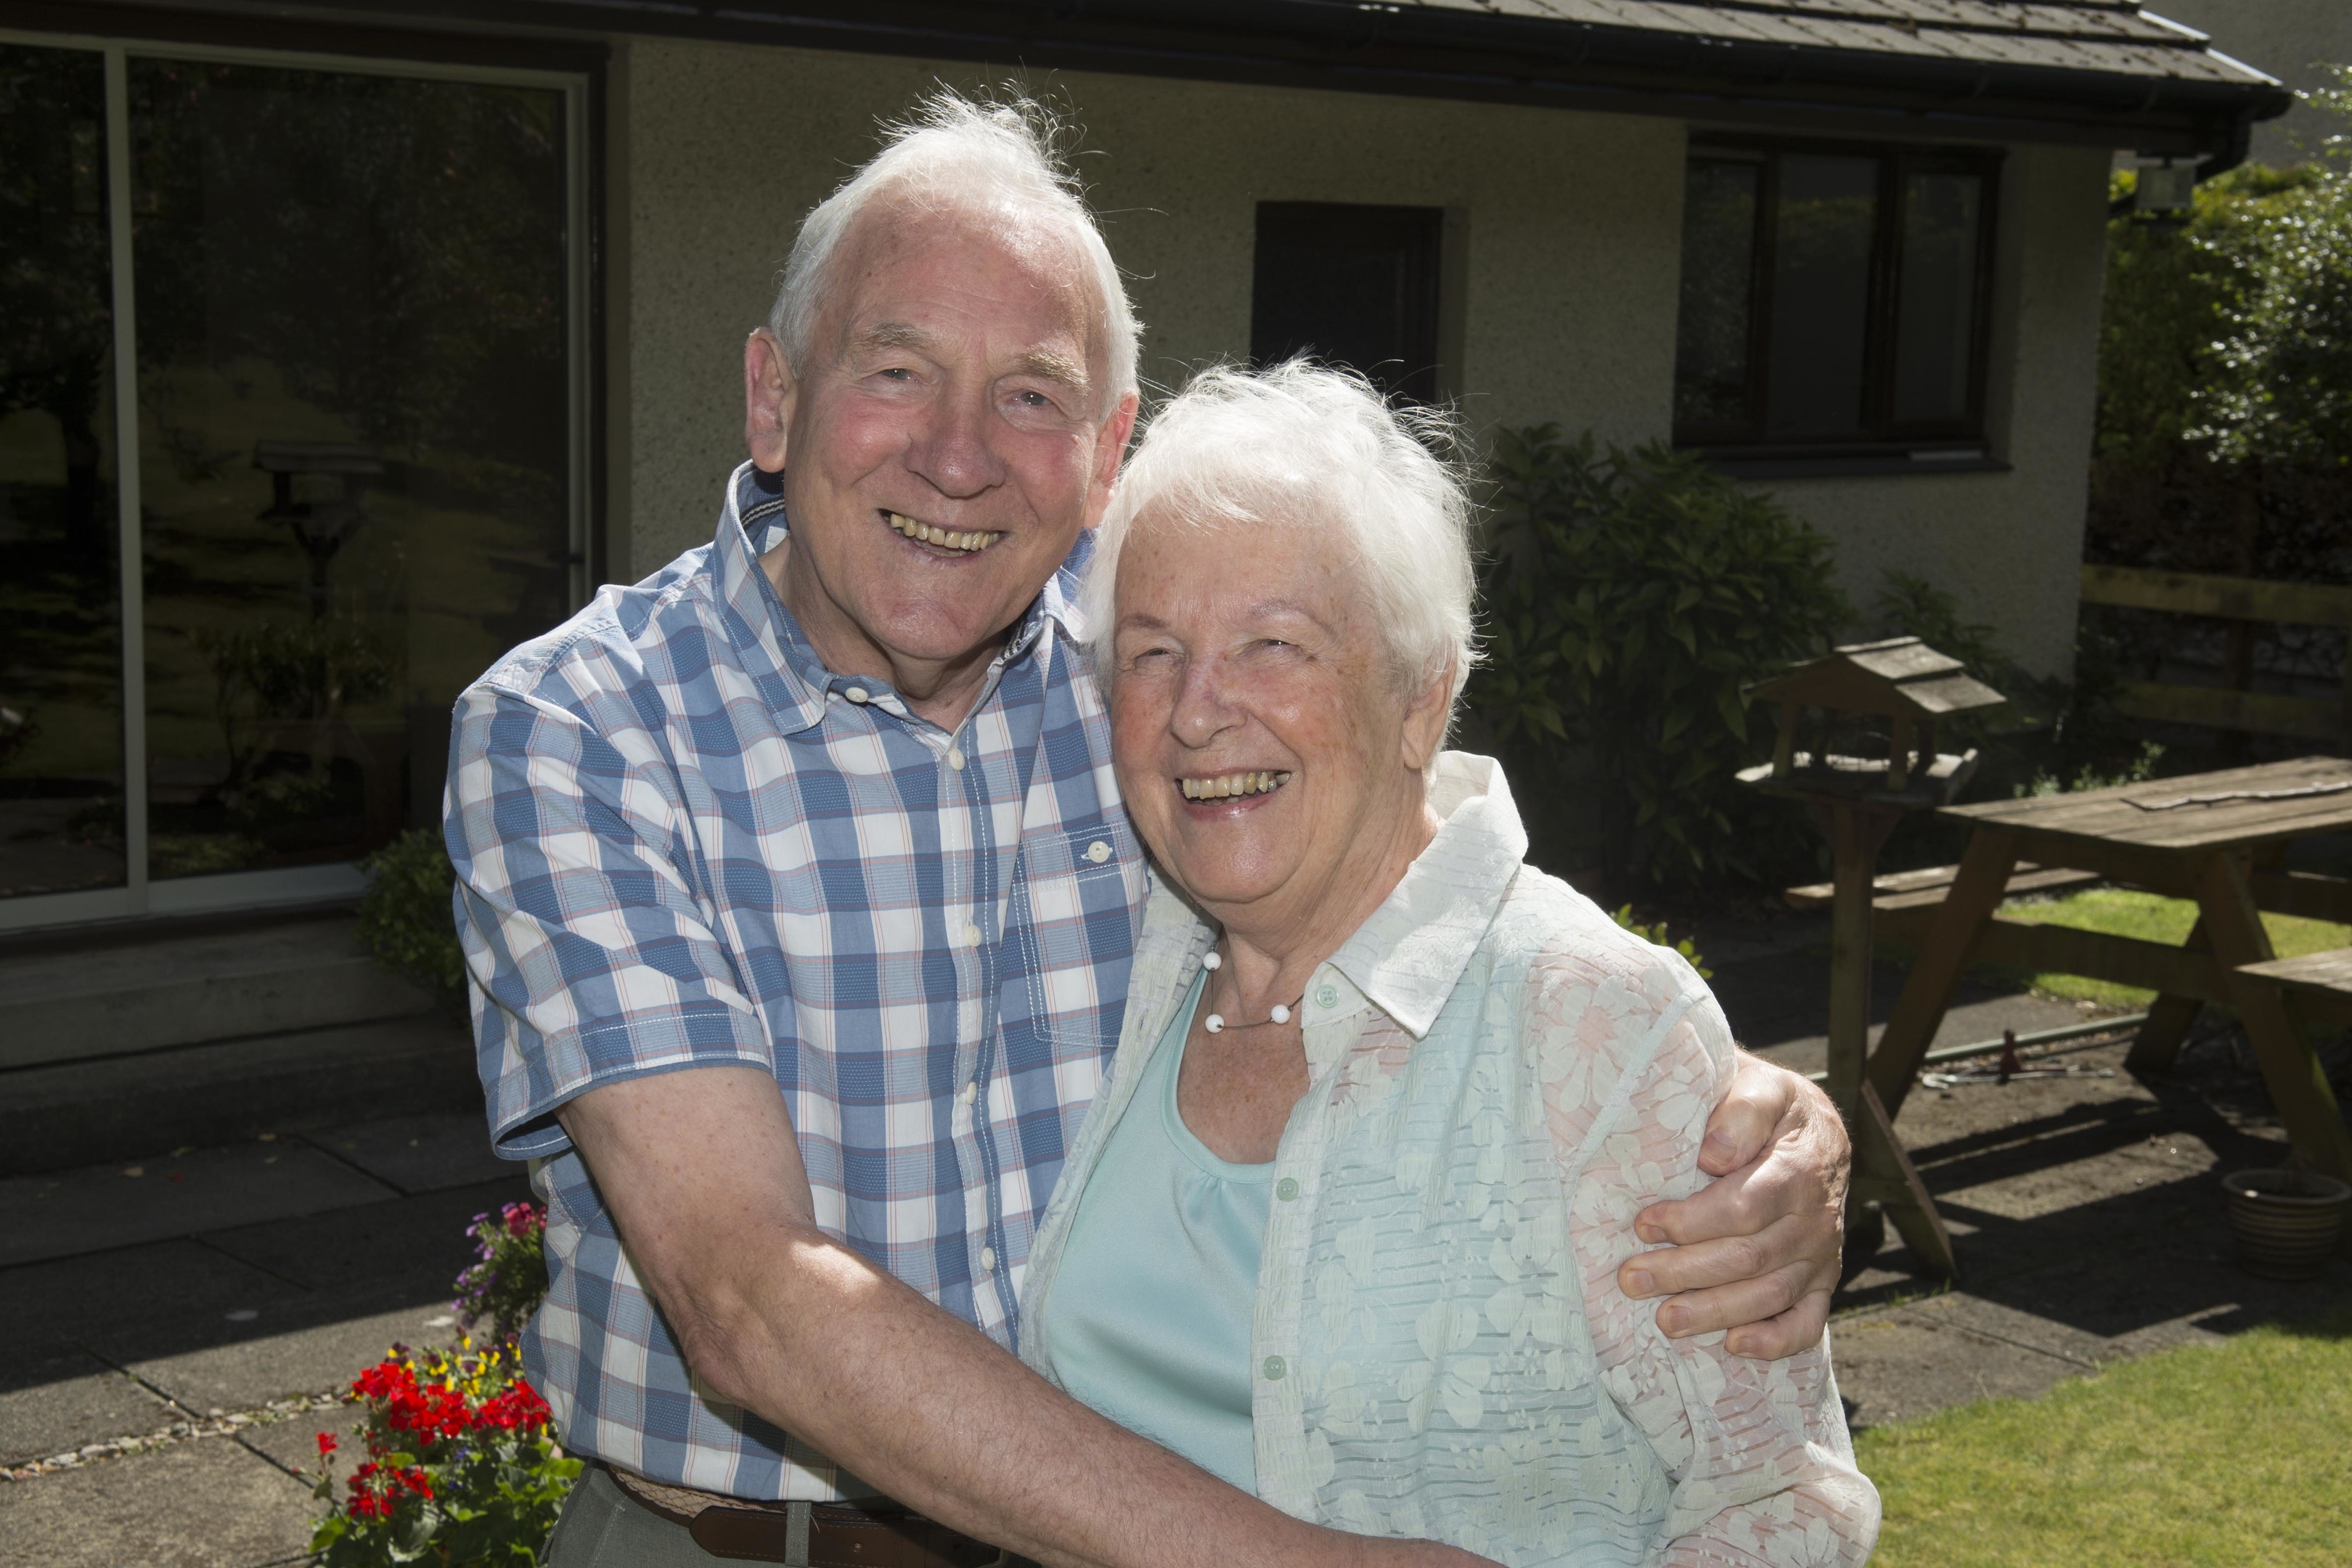 George and Evelyn Bruce have been wed for 60 years.